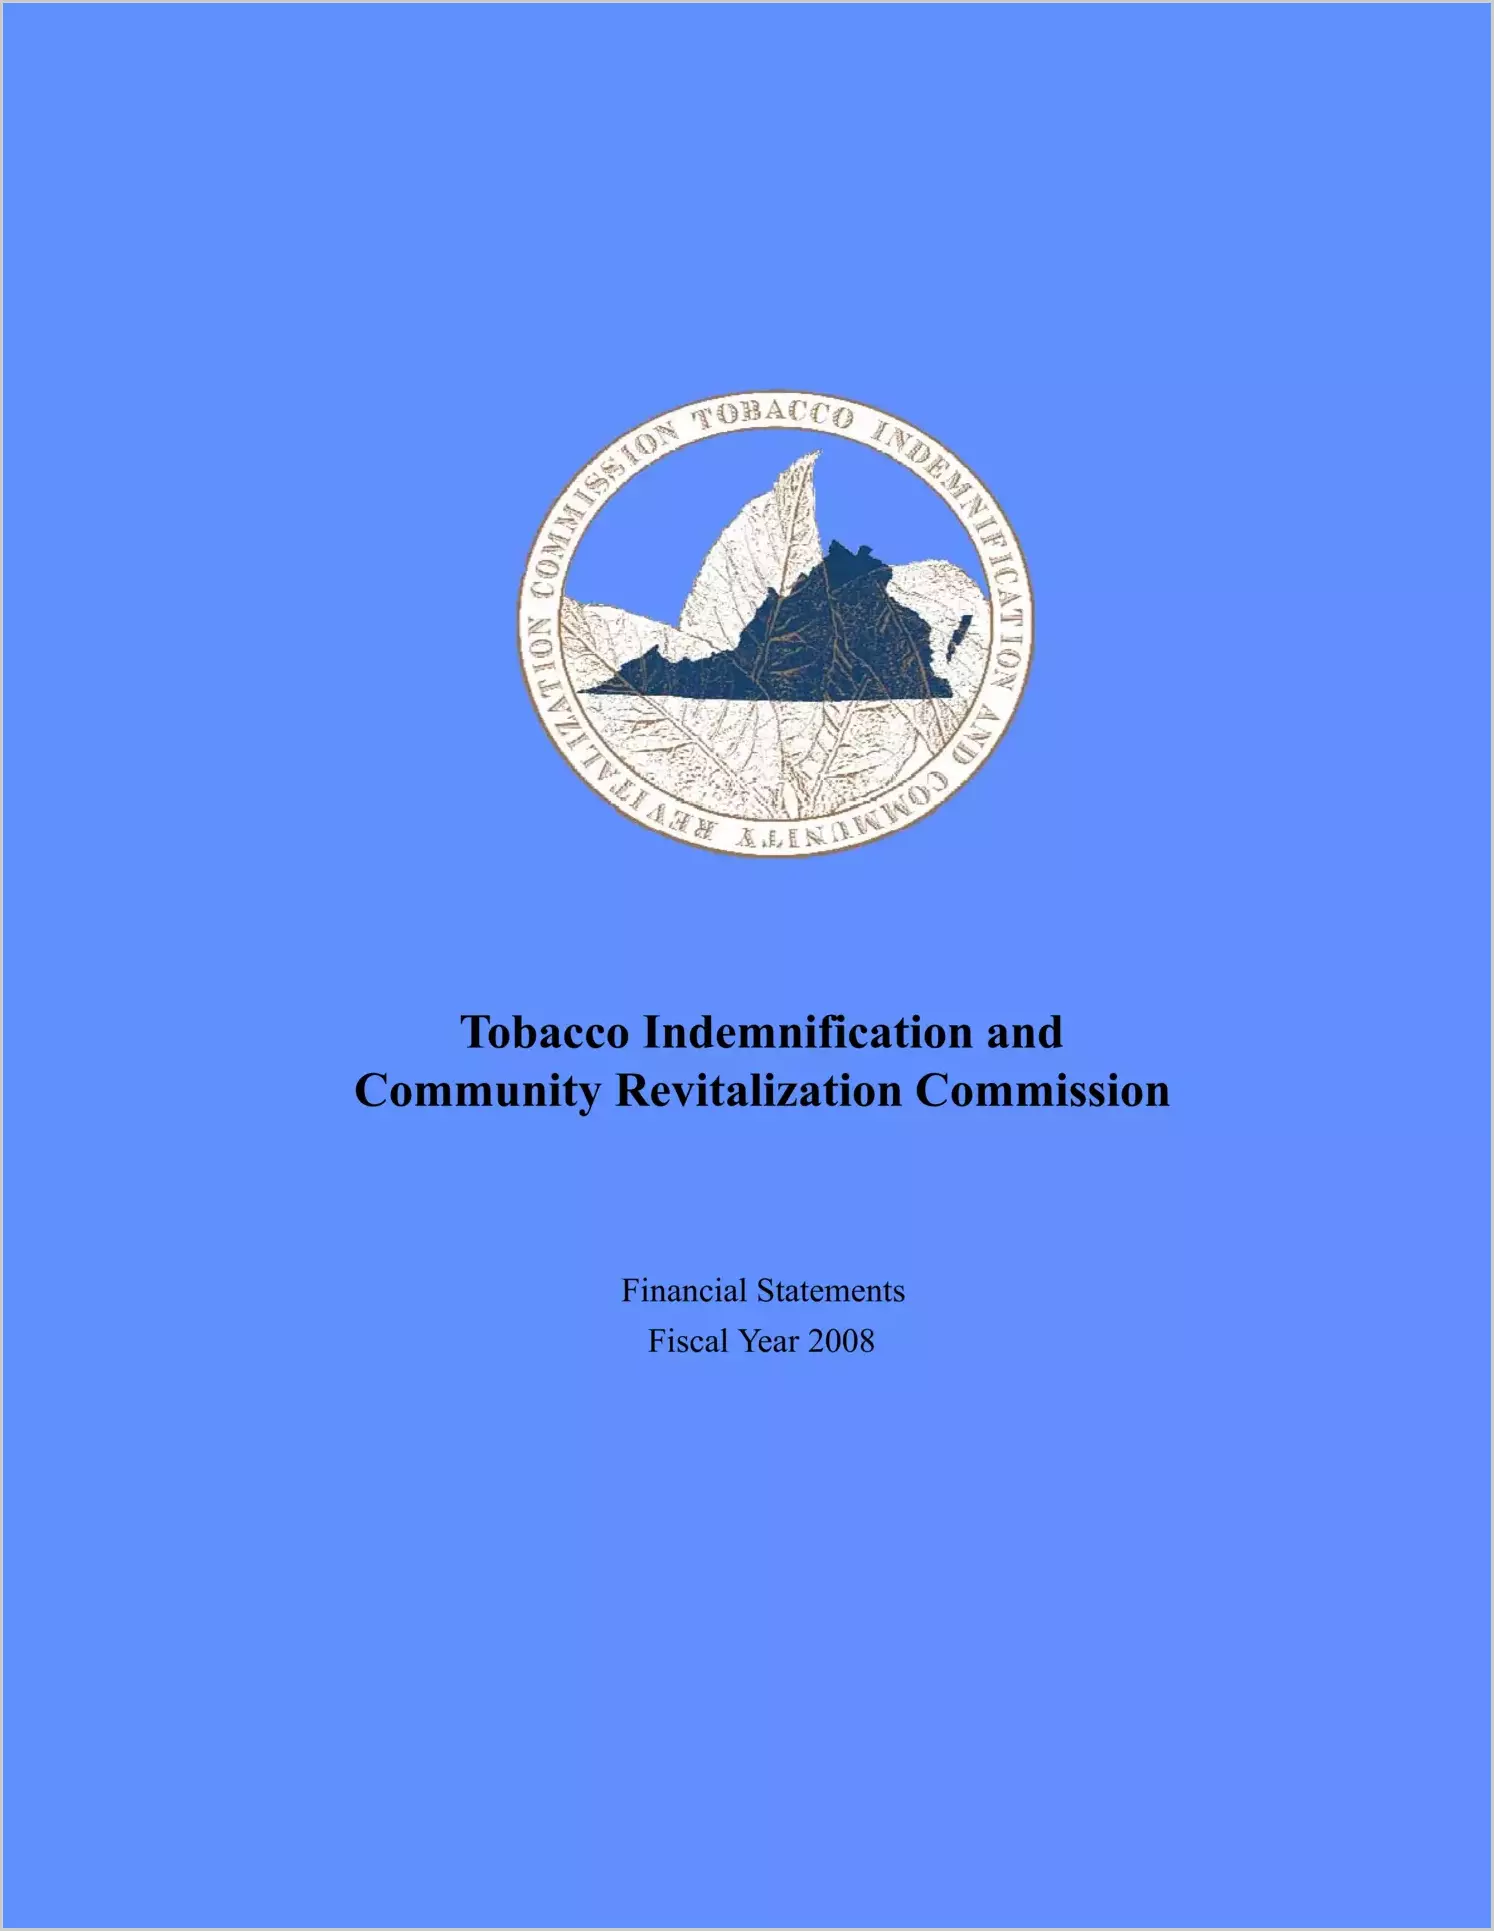 Tobacco Indemnification and Community Revitalization Commission for the year ended June 30, 2008